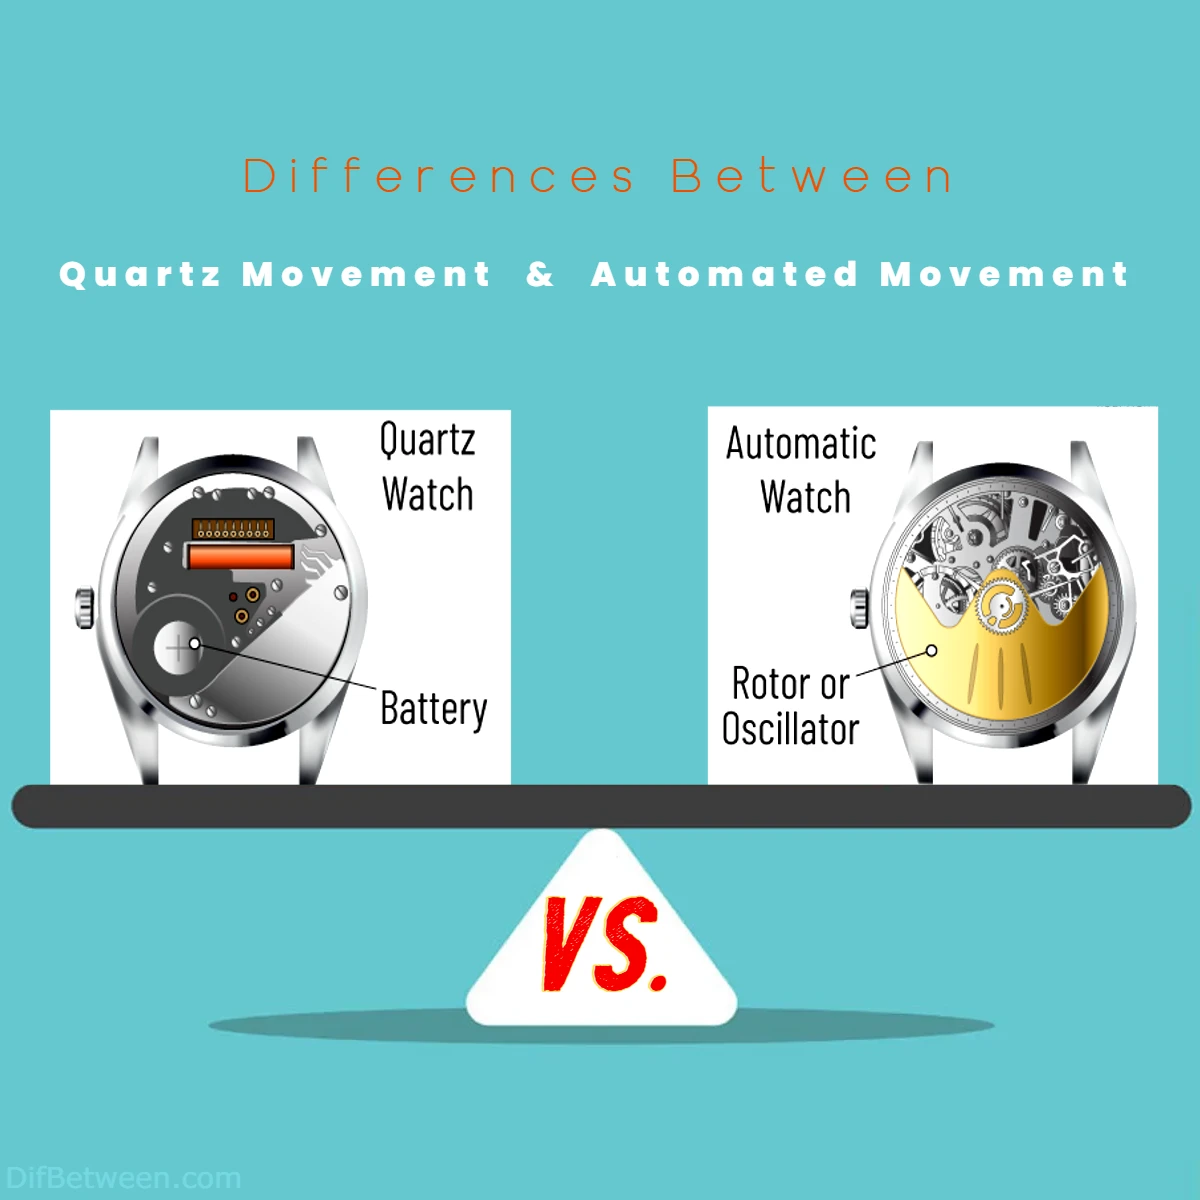 Differences Between Quartz vs Automated Movement in Watch